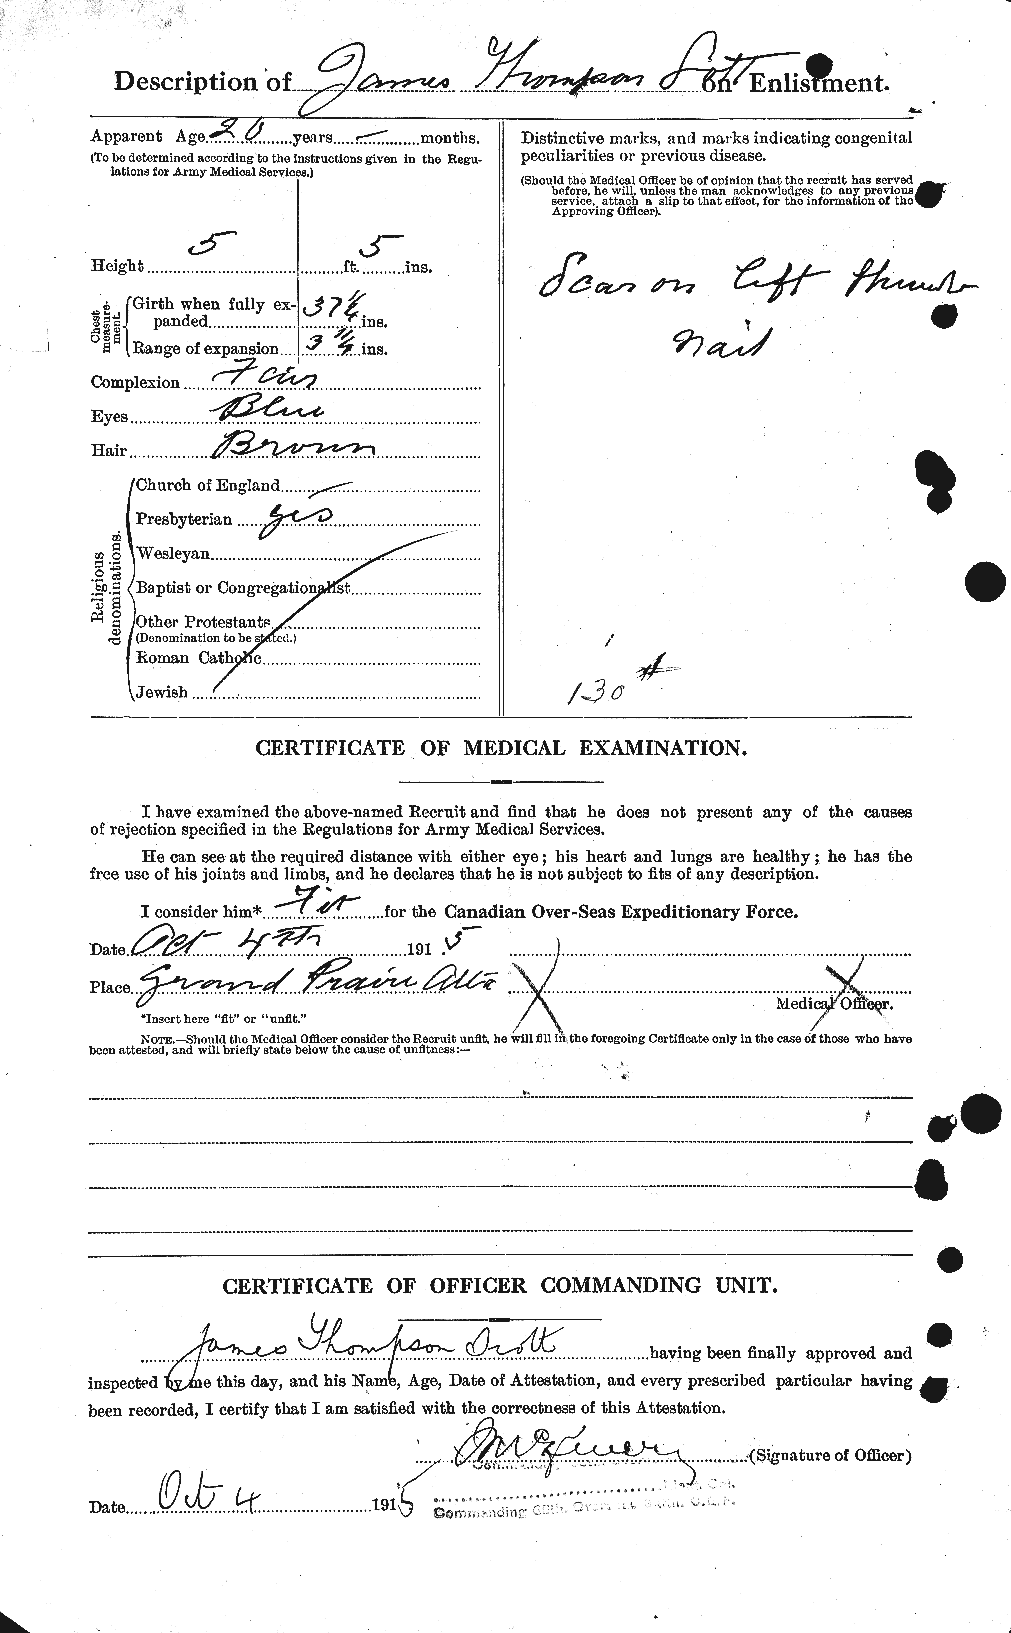 Personnel Records of the First World War - CEF 085173b